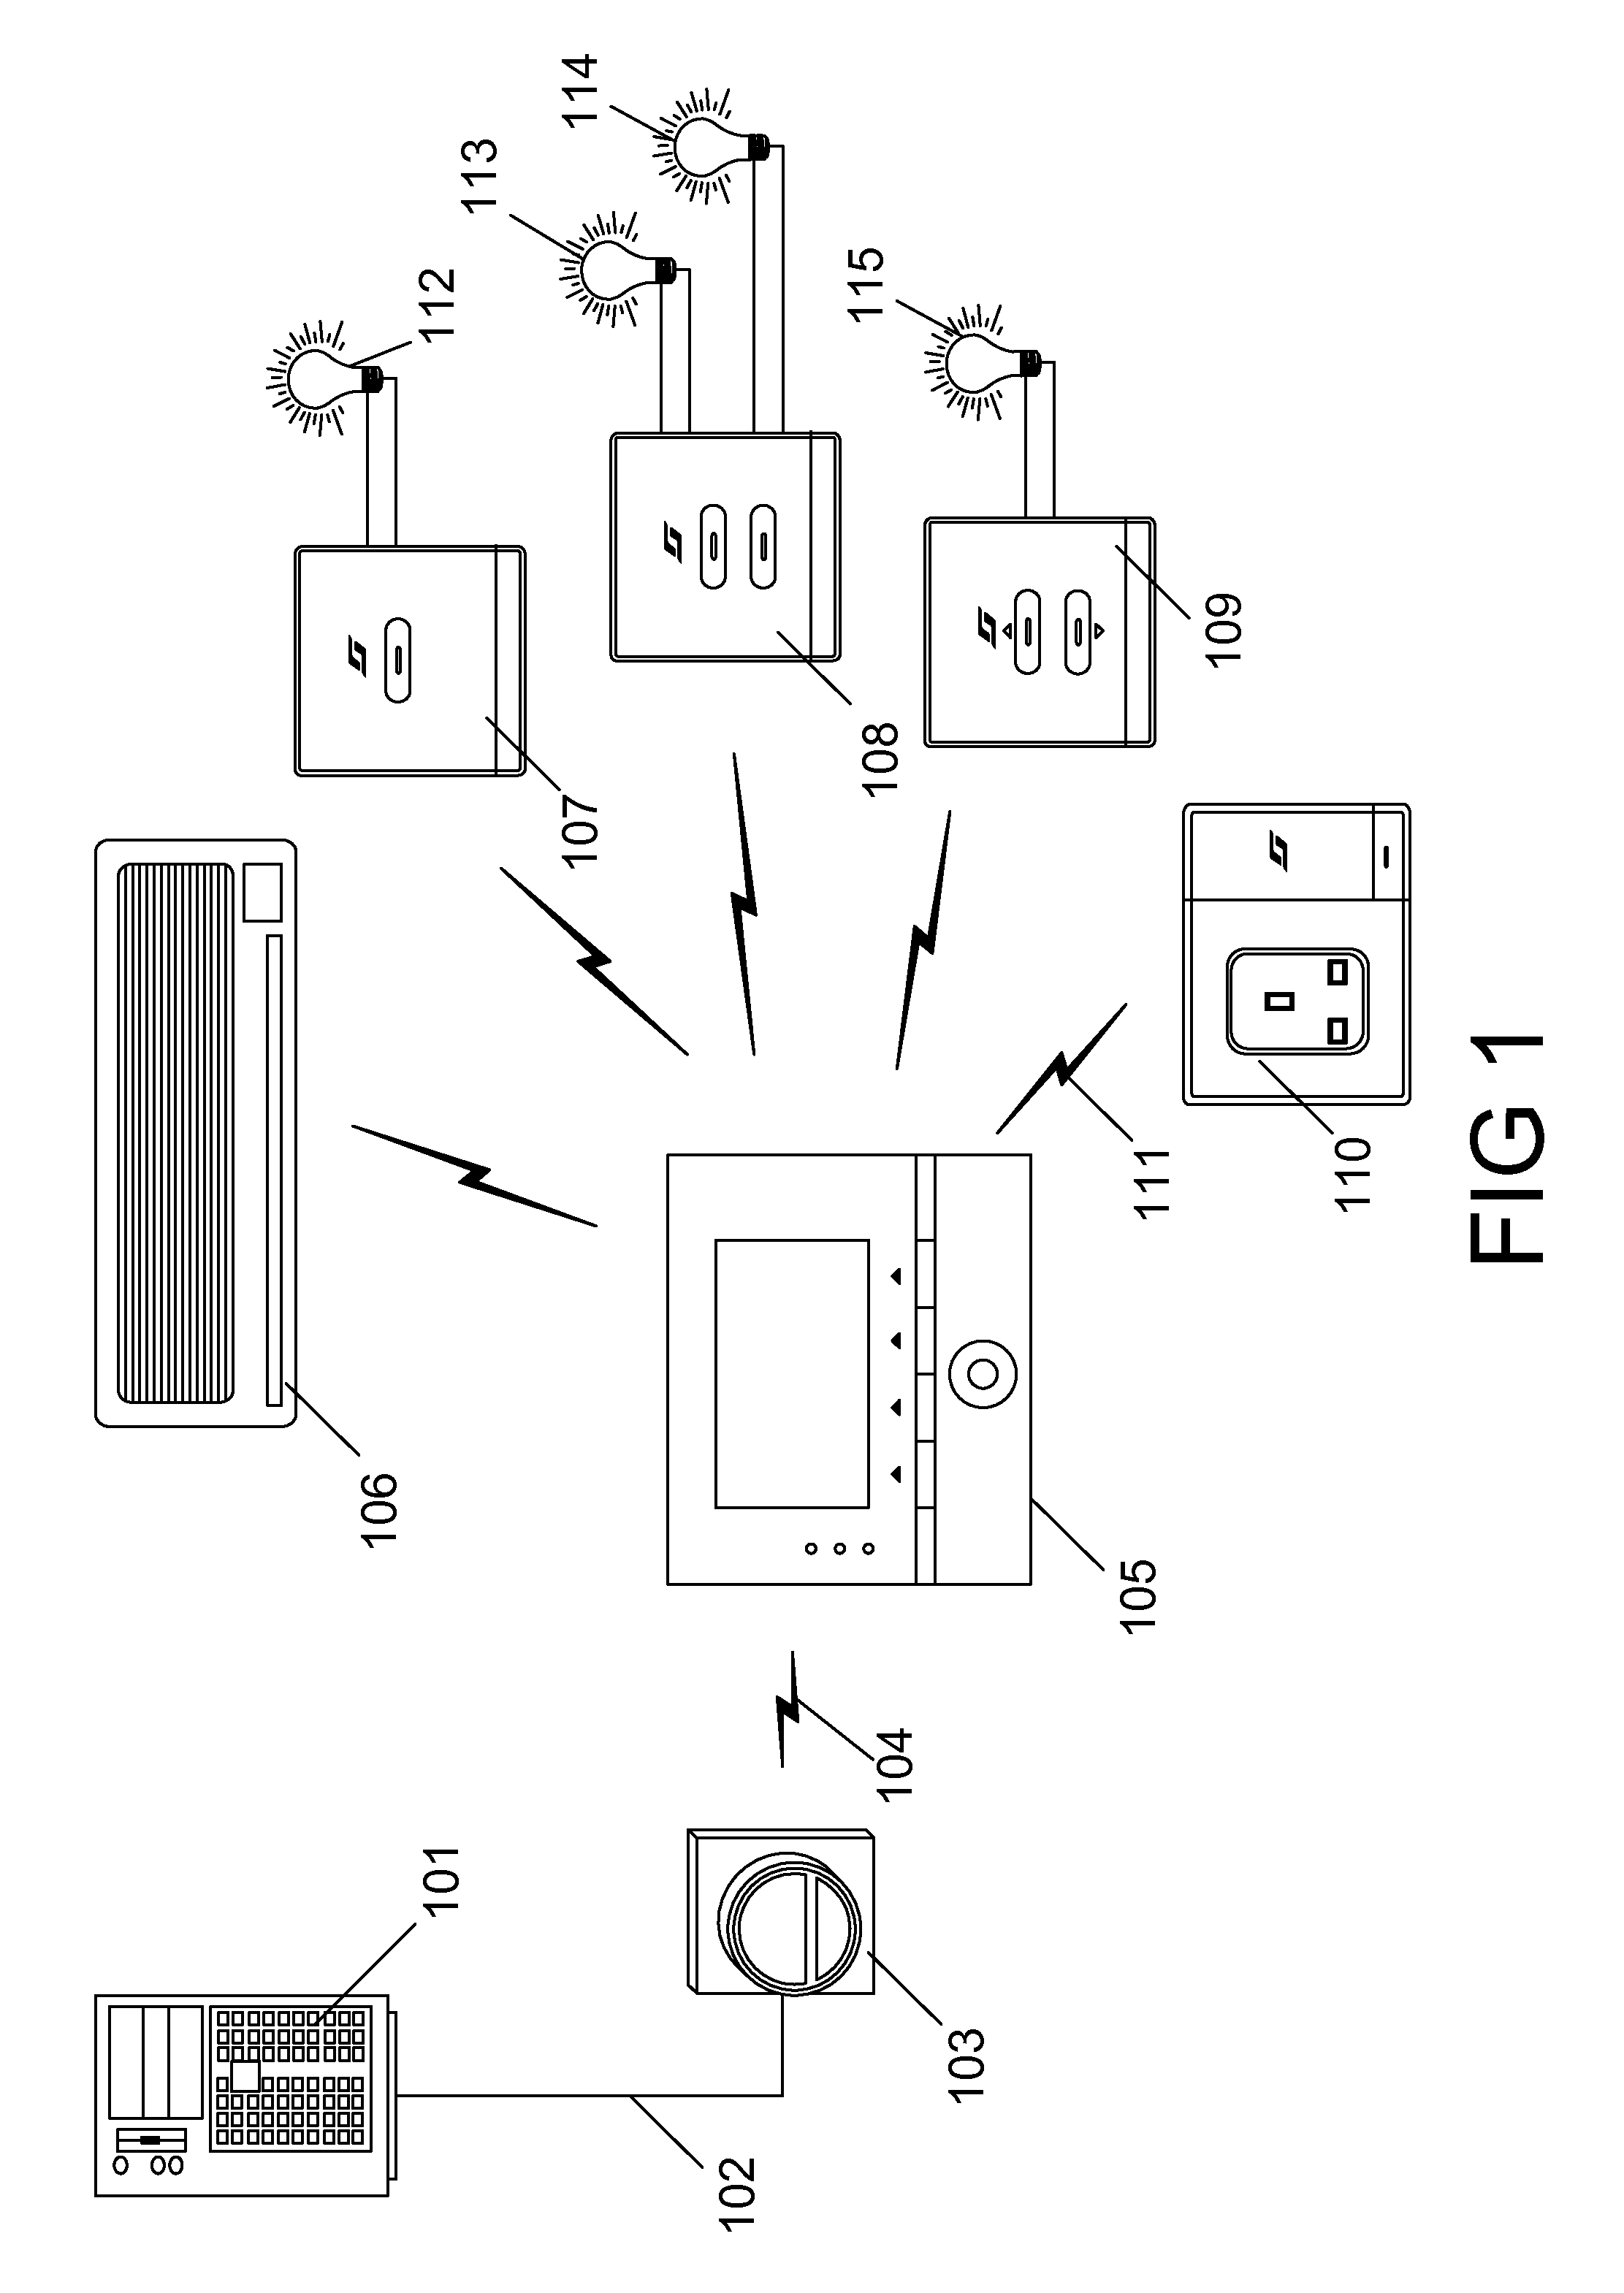 Apparatus and methods for energy management system